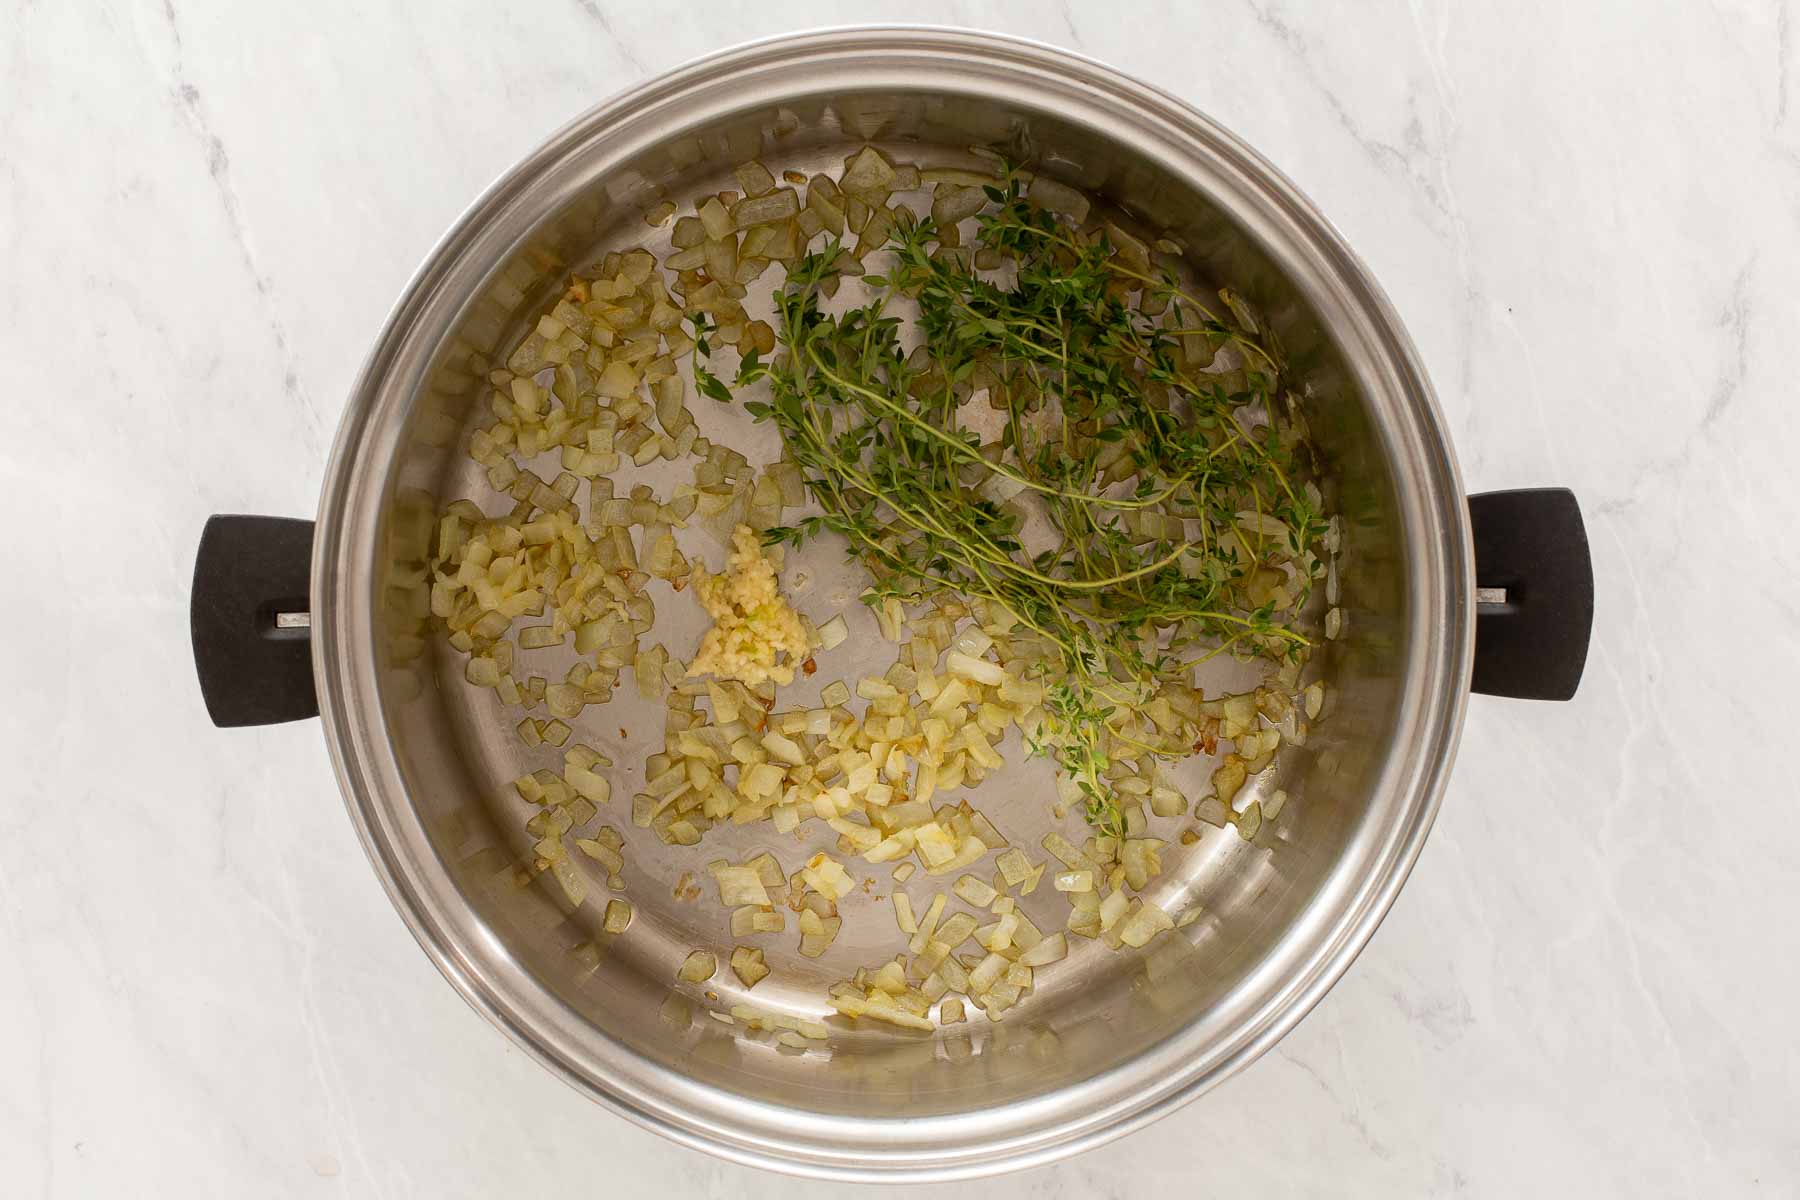 Silver pot with onions, garlic and thyme sprigs.